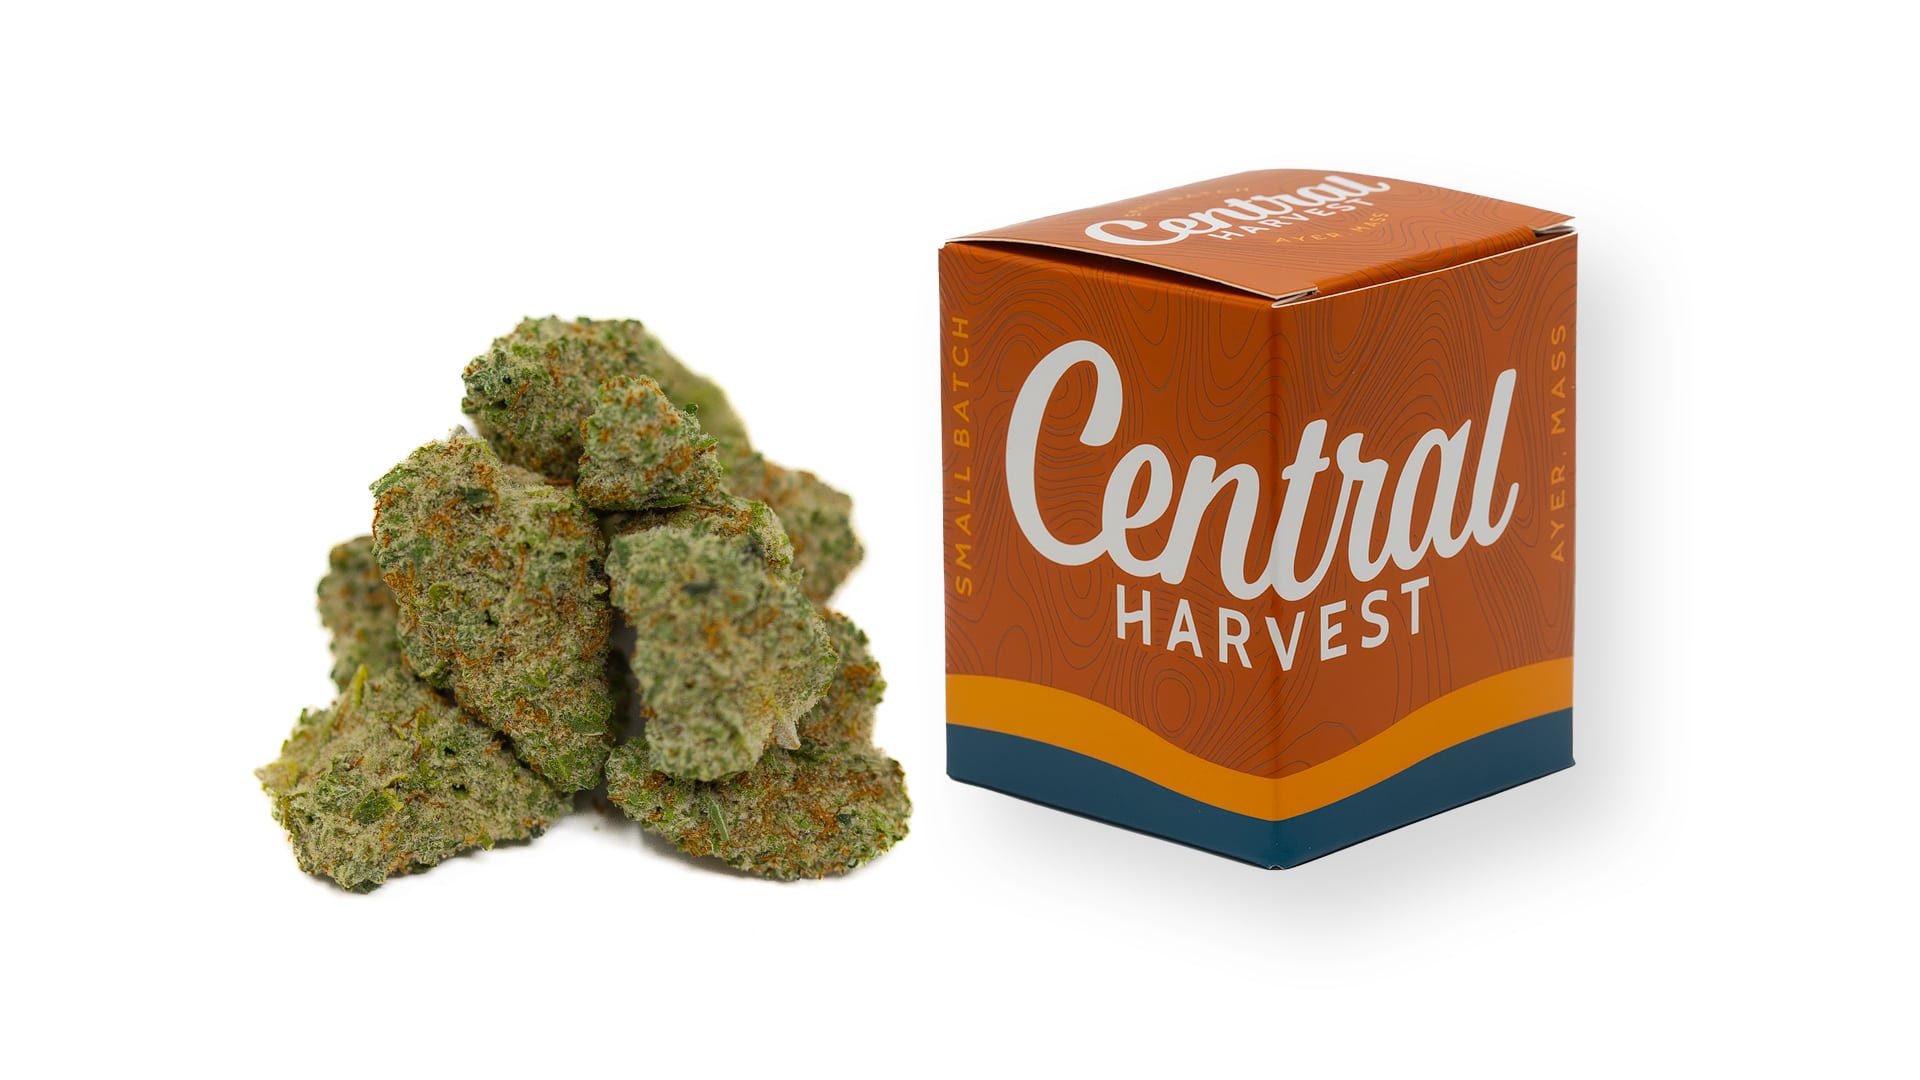 Morockin' Kush is an Indica Cannabis Strain grown and packaged at Central Harvest